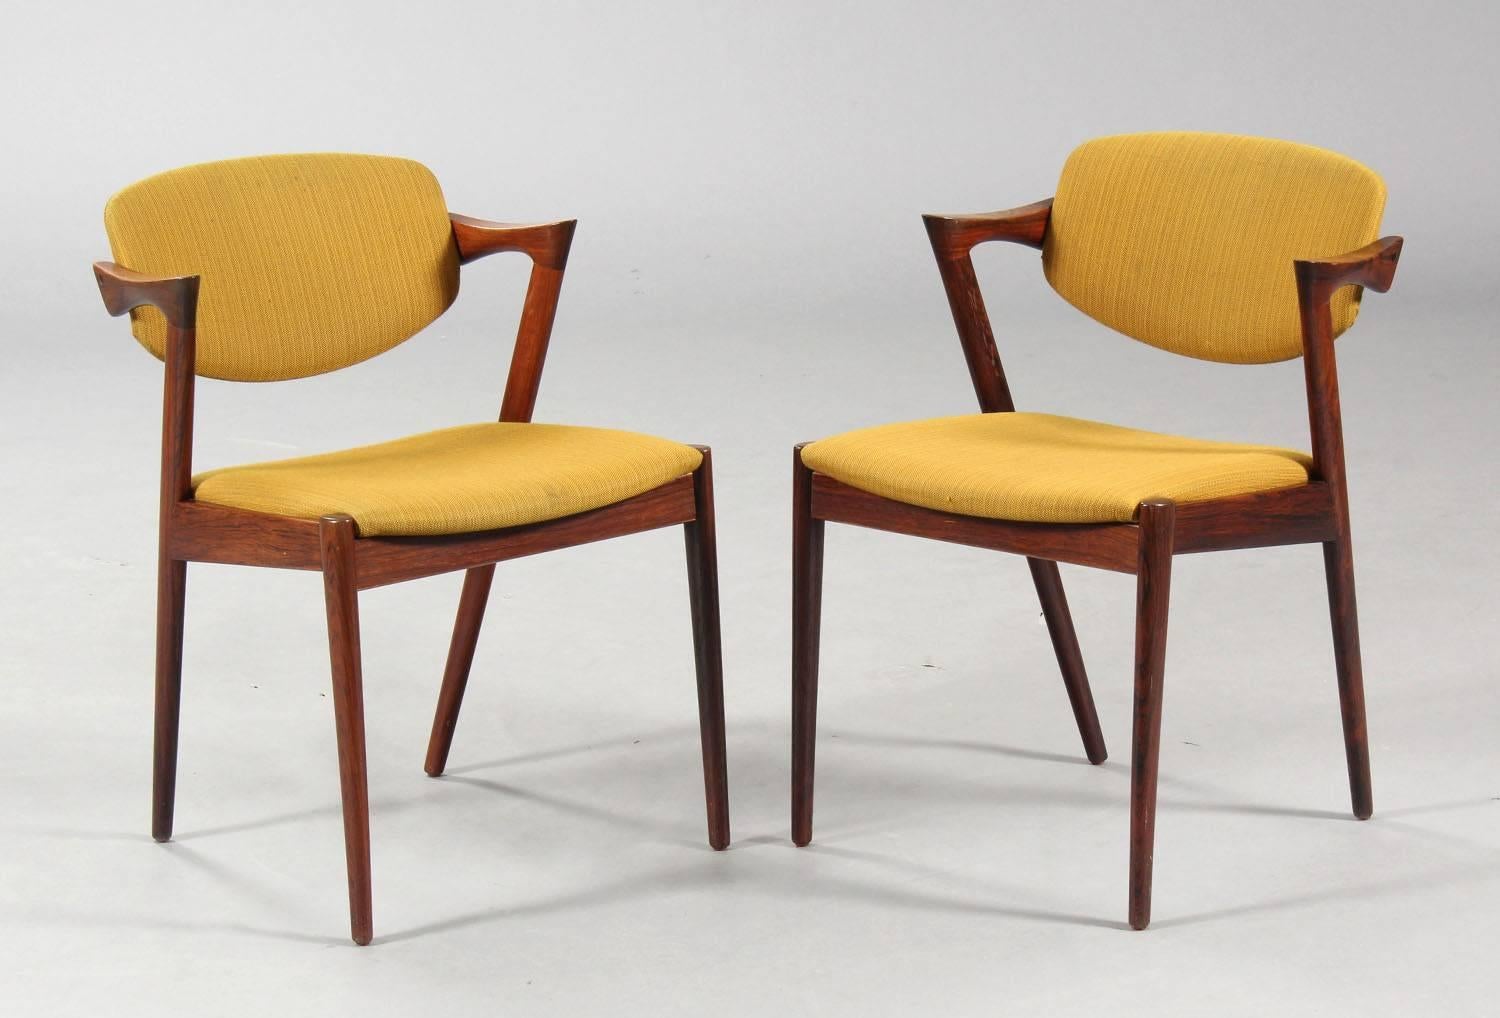 Dining chairs, model 42, designed by Kai Kristiansen and manufactured in Denmark by Schou Andersen Møbelfabrik. The chairs are made from solid hardwood, featuring tapered legs, curved armrests and turquoise wool upholstery. Good vintage